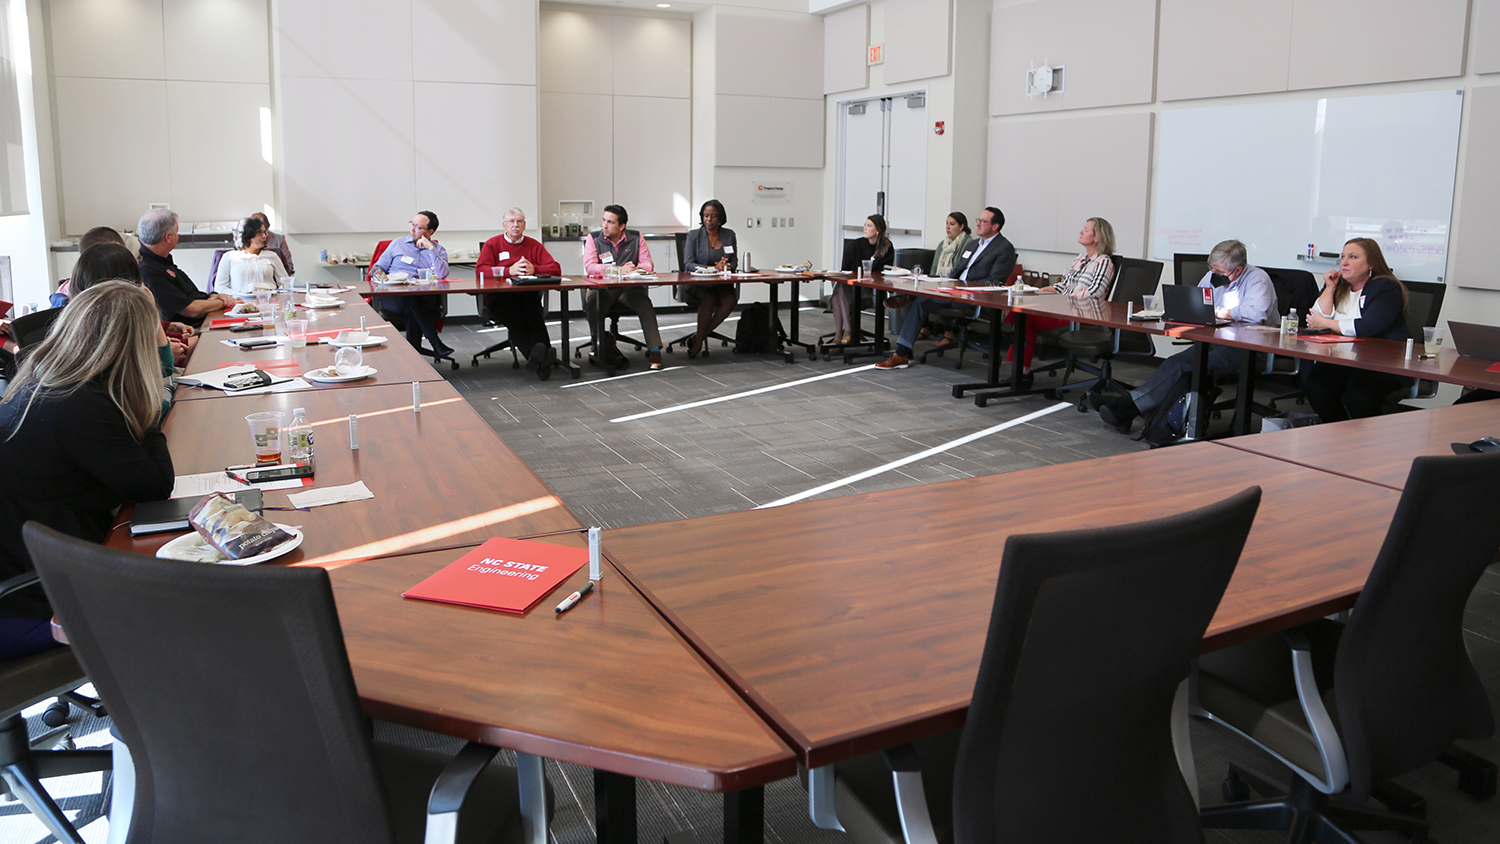 Volunteer leaders meet to discuss strategies and share ideas in a large conference room seated at a series of tables arranged in a square.